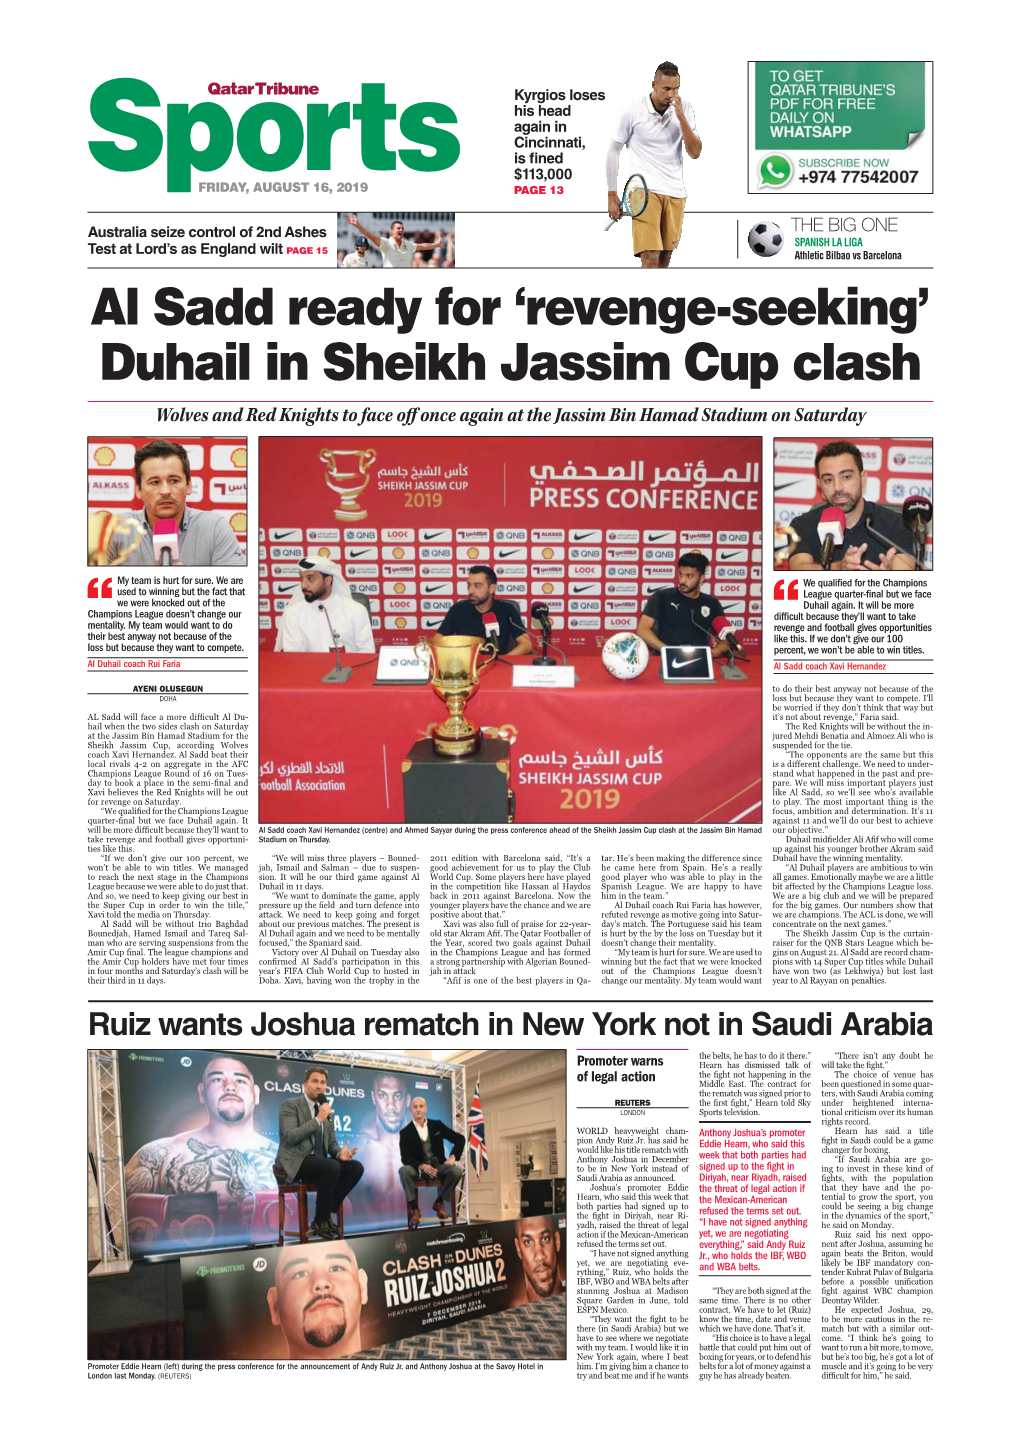 Al Sadd Ready for ‘Revenge-Seeking’ Duhail in Sheikh Jassim Cup Clash Wolves and Red Knights to Face Off Once Again at the Jassim Bin Hamad Stadium on Saturday